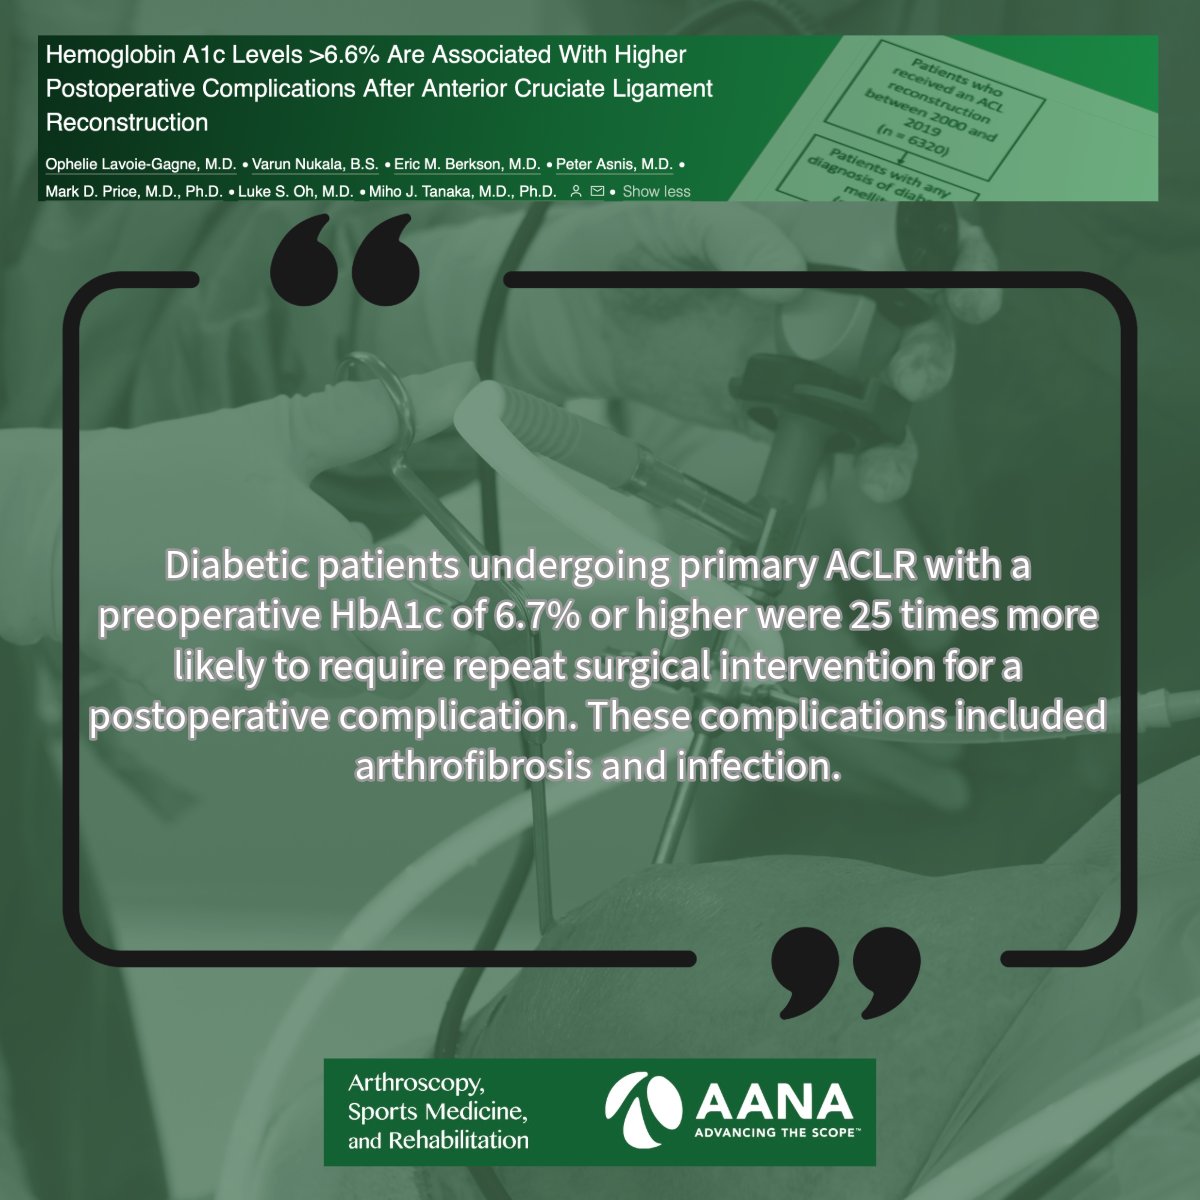 Do you commonly check Hemoglobin A1c levels prior to ACL surgery? This study evaluates postoperative complications in diabetic patients undergoing primary ACLR with elevated HbA1c. #ACL #KneeArthroscopy @DrMihoTanaka @LukeOhMD @eberks ow.ly/TCRu50Qy9RG